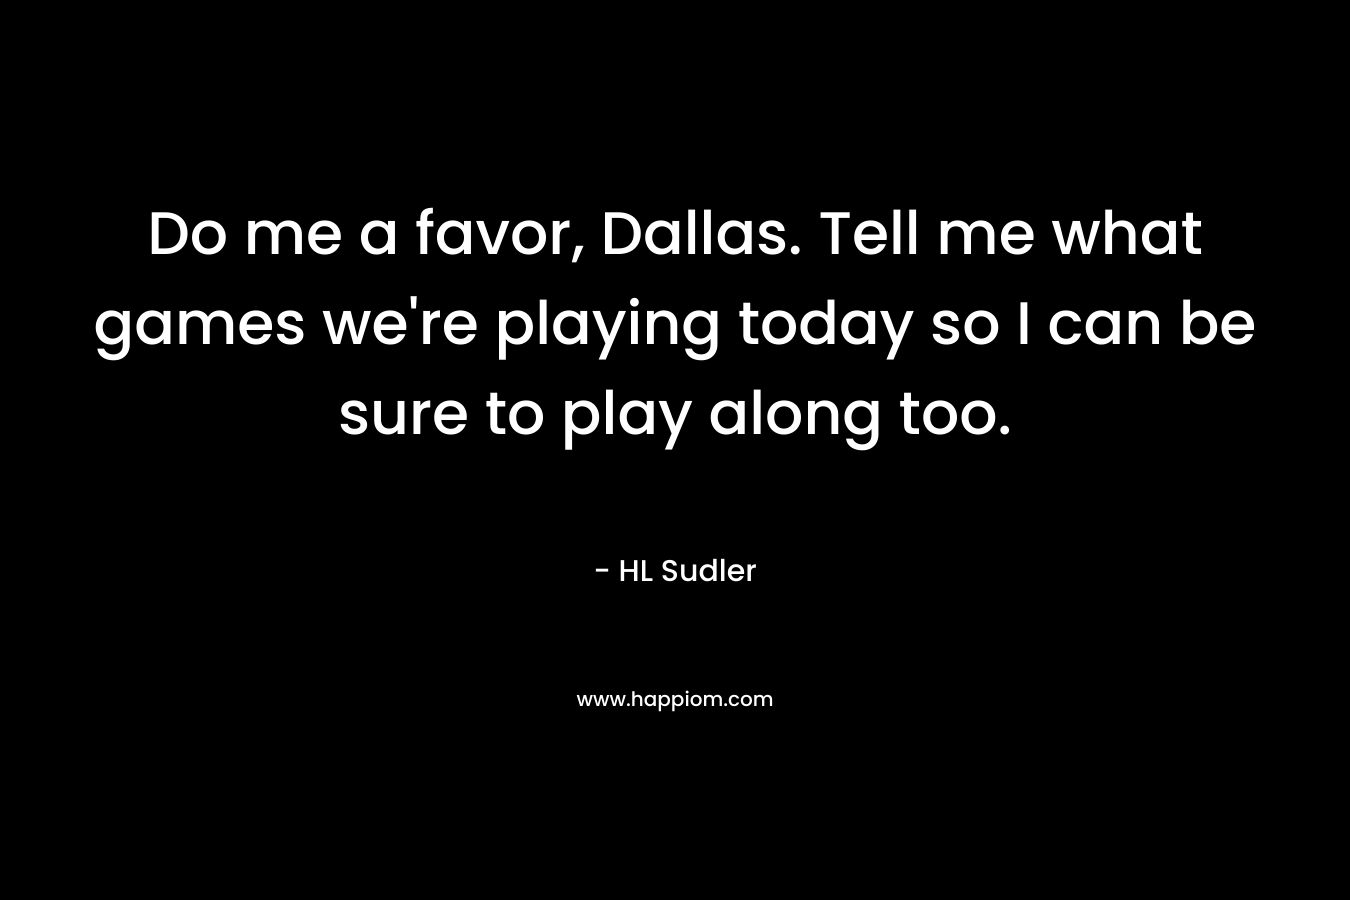 Do me a favor, Dallas. Tell me what games we’re playing today so I can be sure to play along too. – HL Sudler